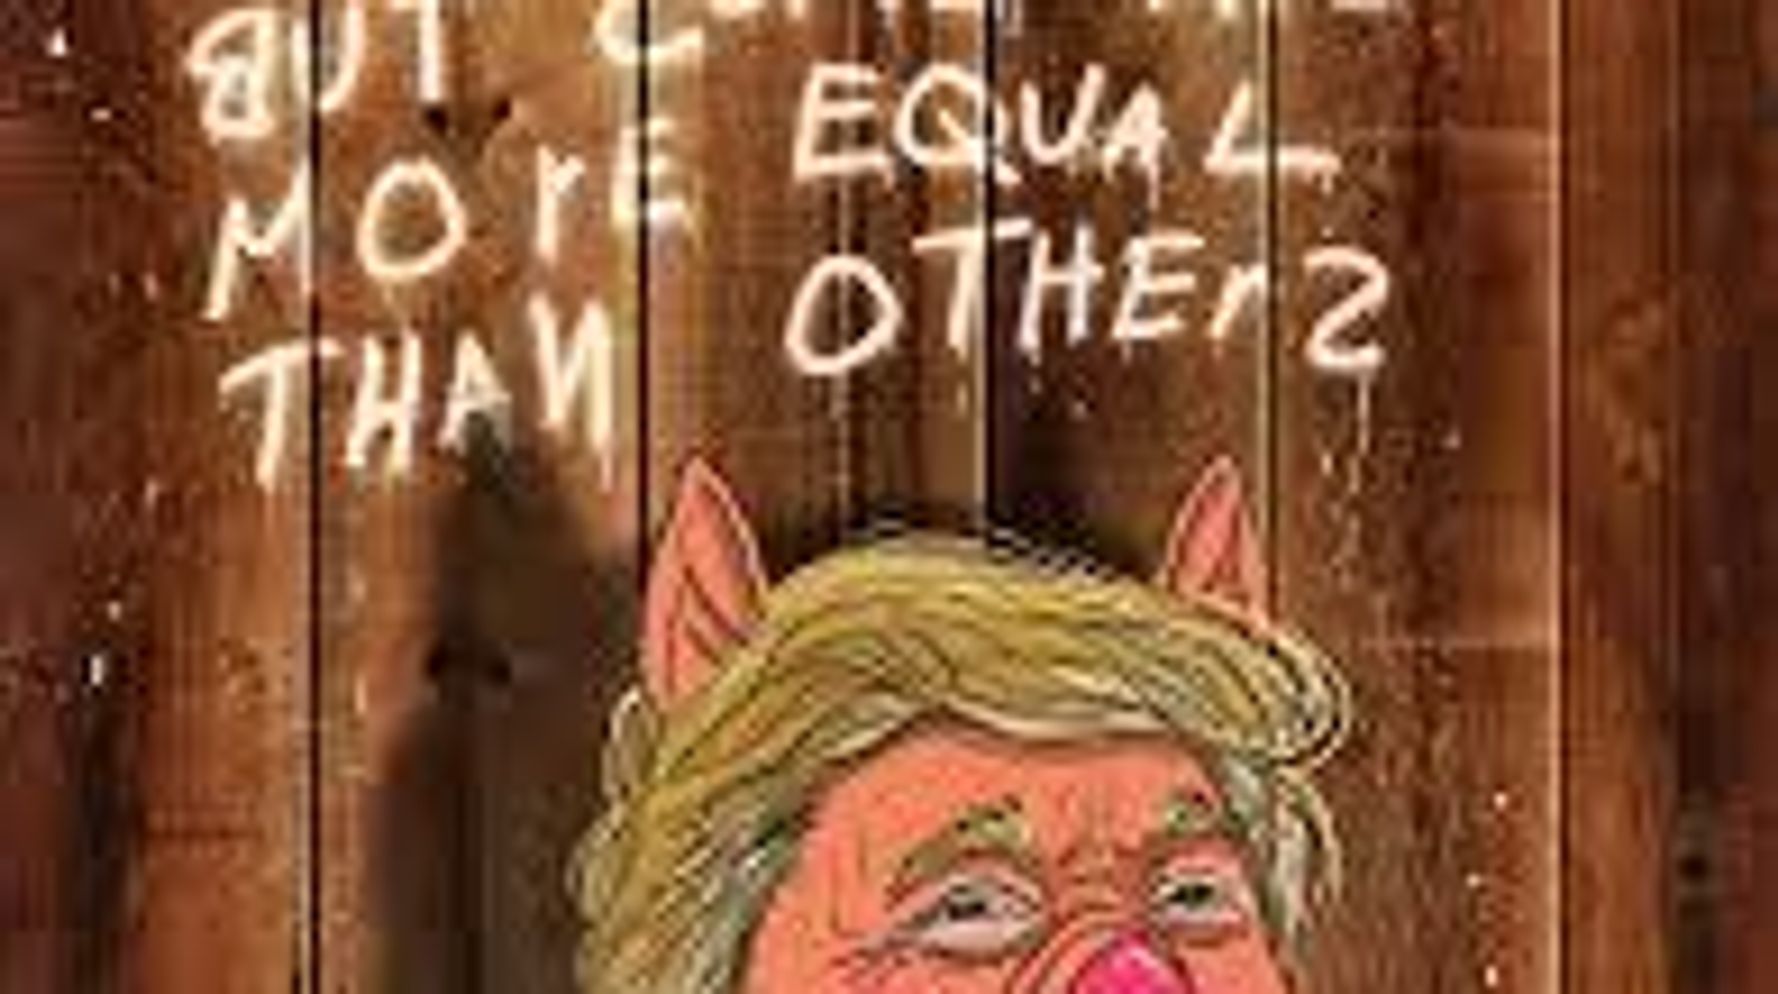 George Orwell's Animal Farm: Guide to the rise of authoritarianism in the  Donald Trump era?